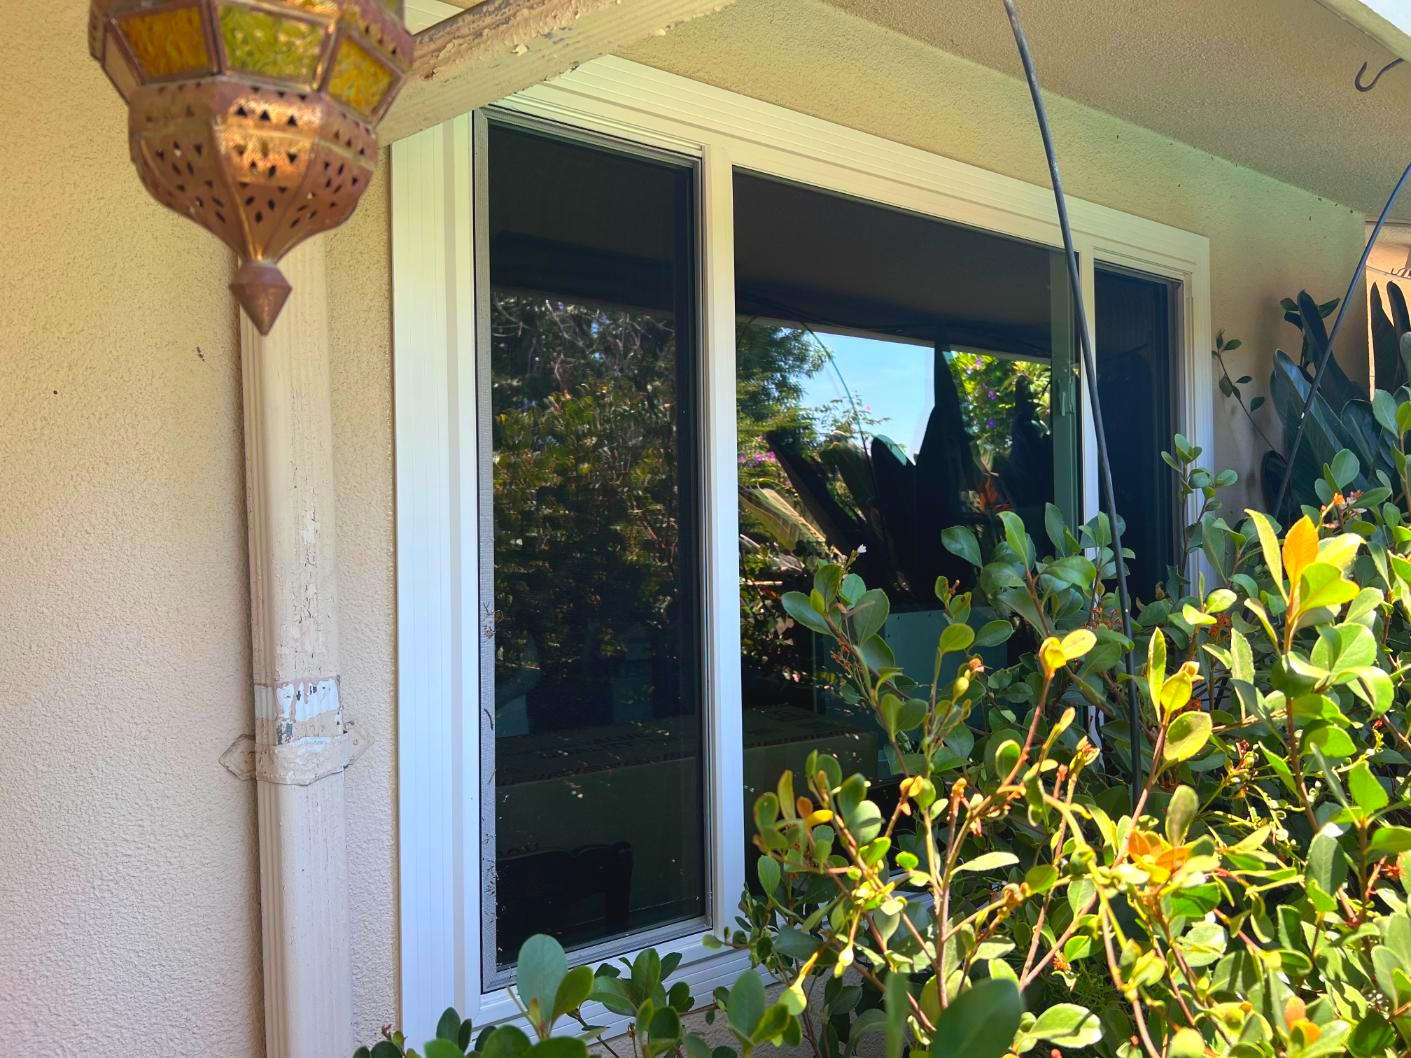 Window Replacement in San Diego, CA